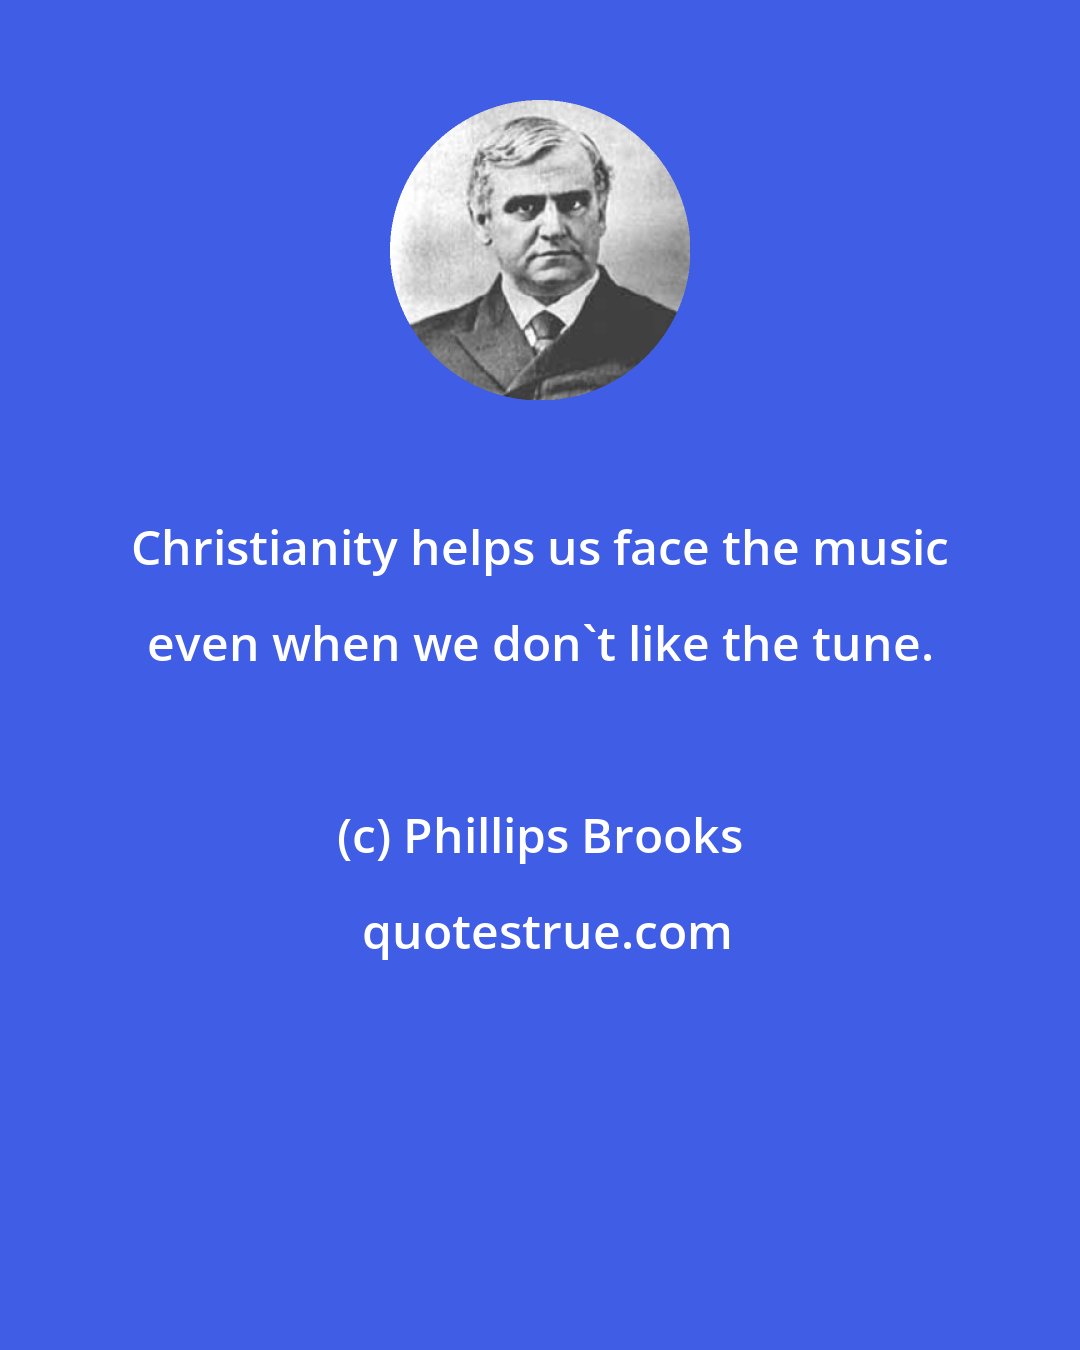 Phillips Brooks: Christianity helps us face the music even when we don't like the tune.